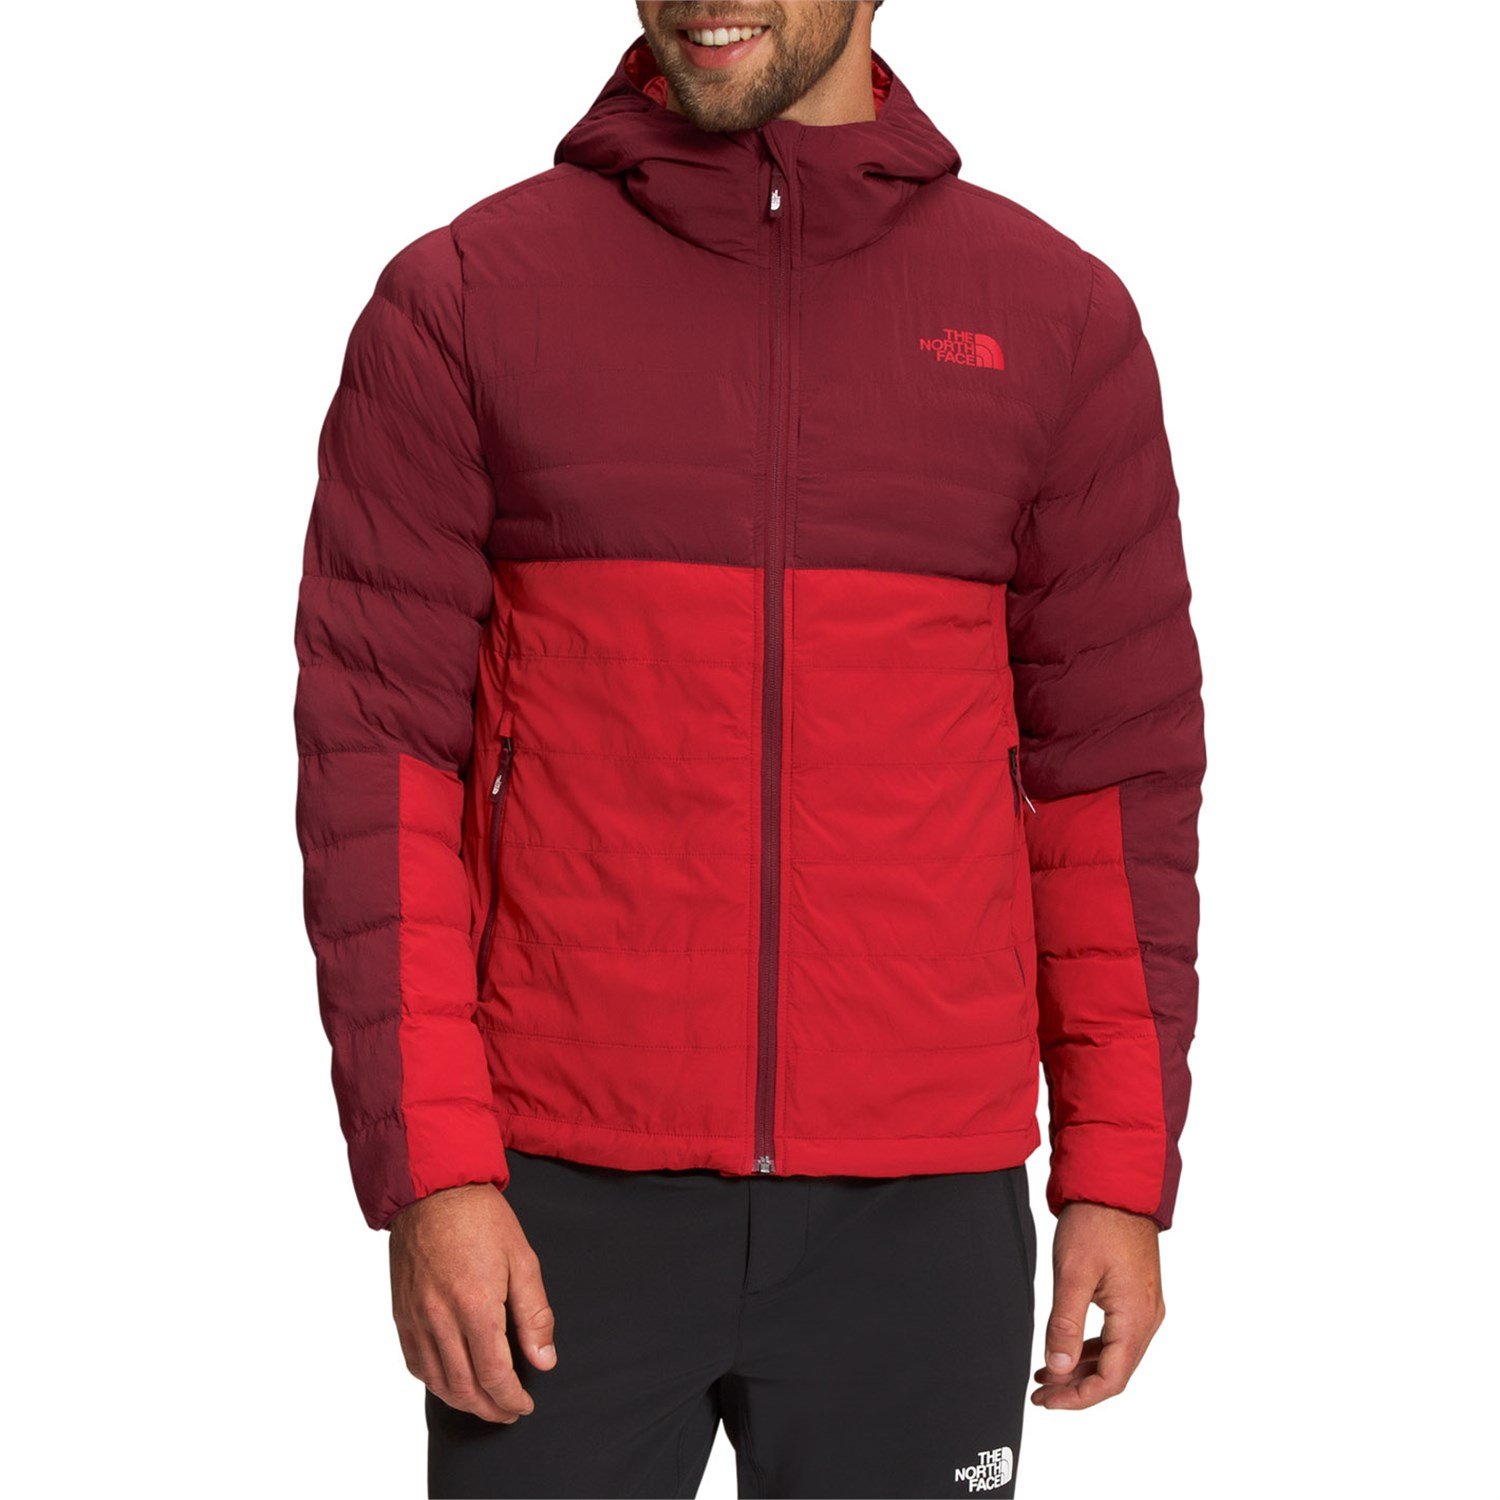 Куртка The North Face ThermoBall, красный куртка the north face reversible thermoball черный красный